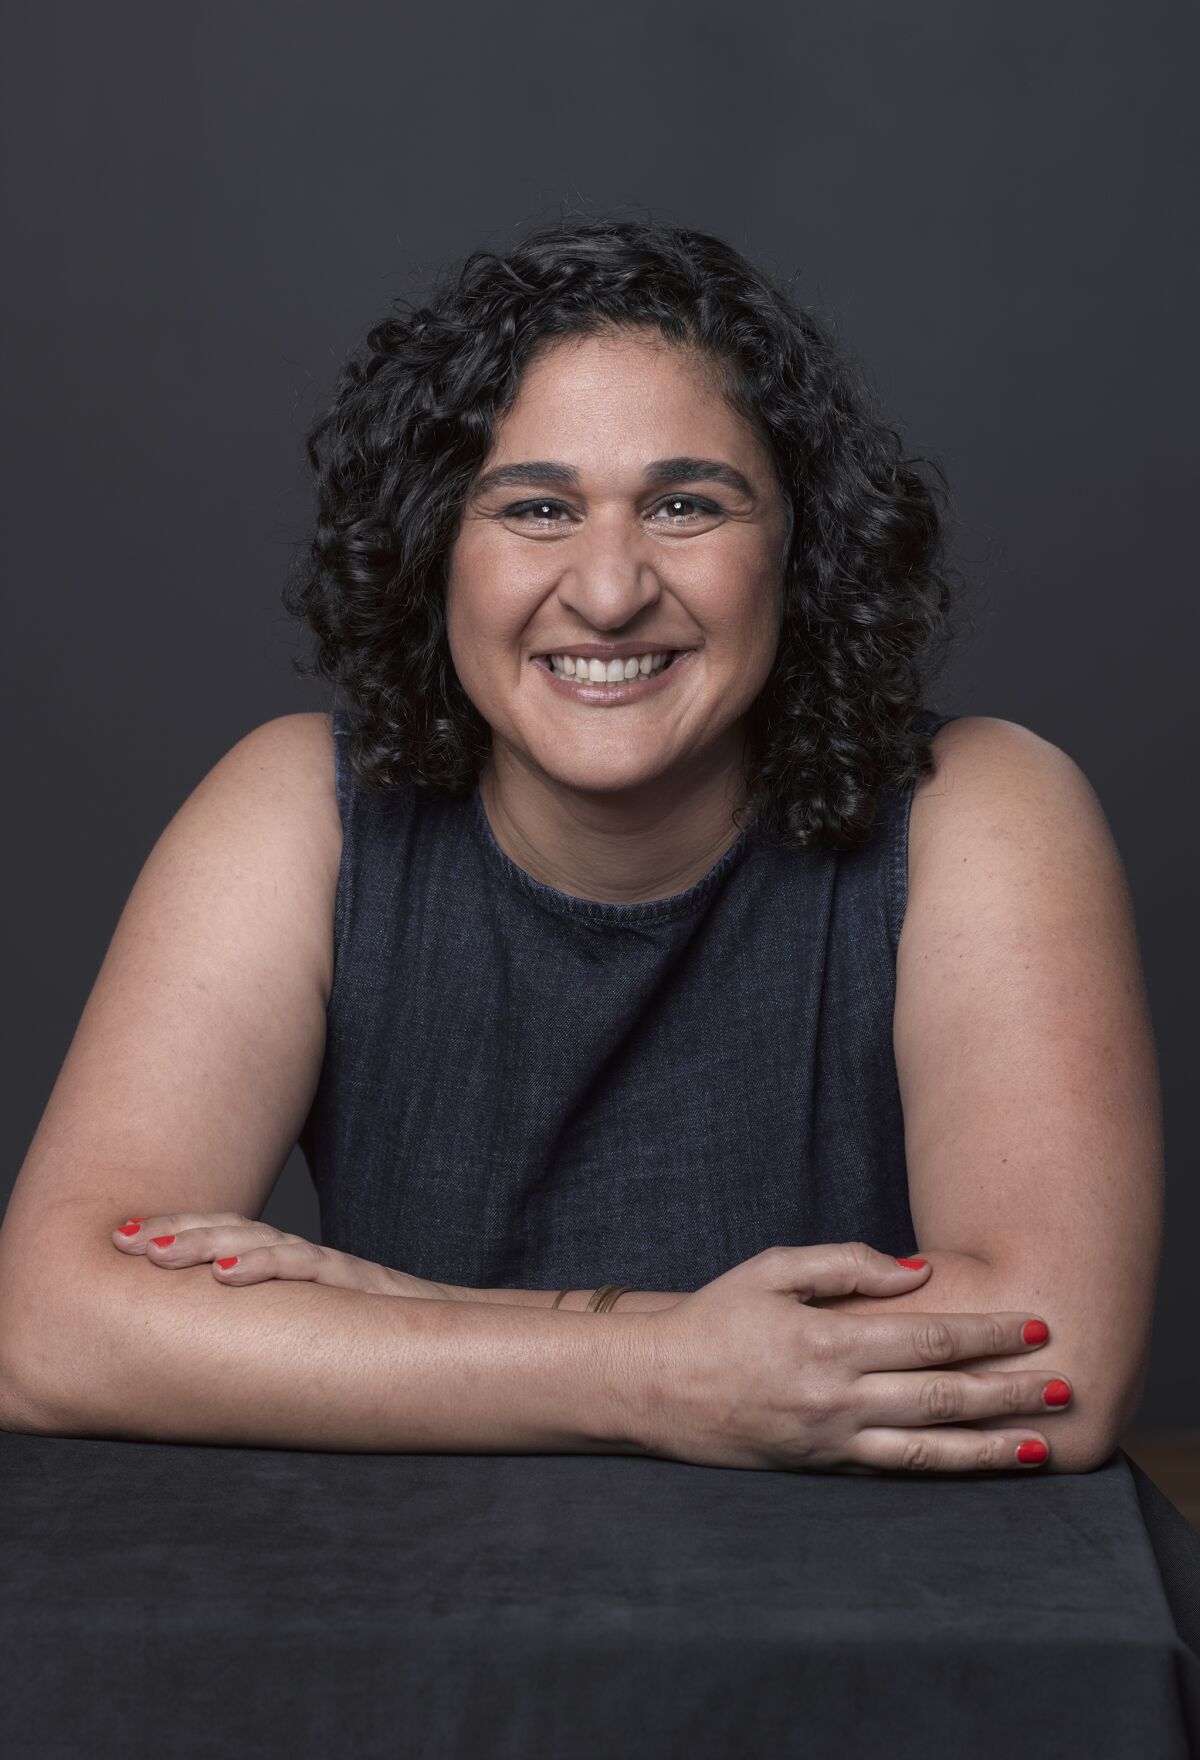 Samin Nosrat's success trajectory shows no sign of slowing: she edited the just-published "Best American Food Writing 2019," is working on her book, "What to Cook," and is developing another TV series that will likely take her on more culinary journeys.